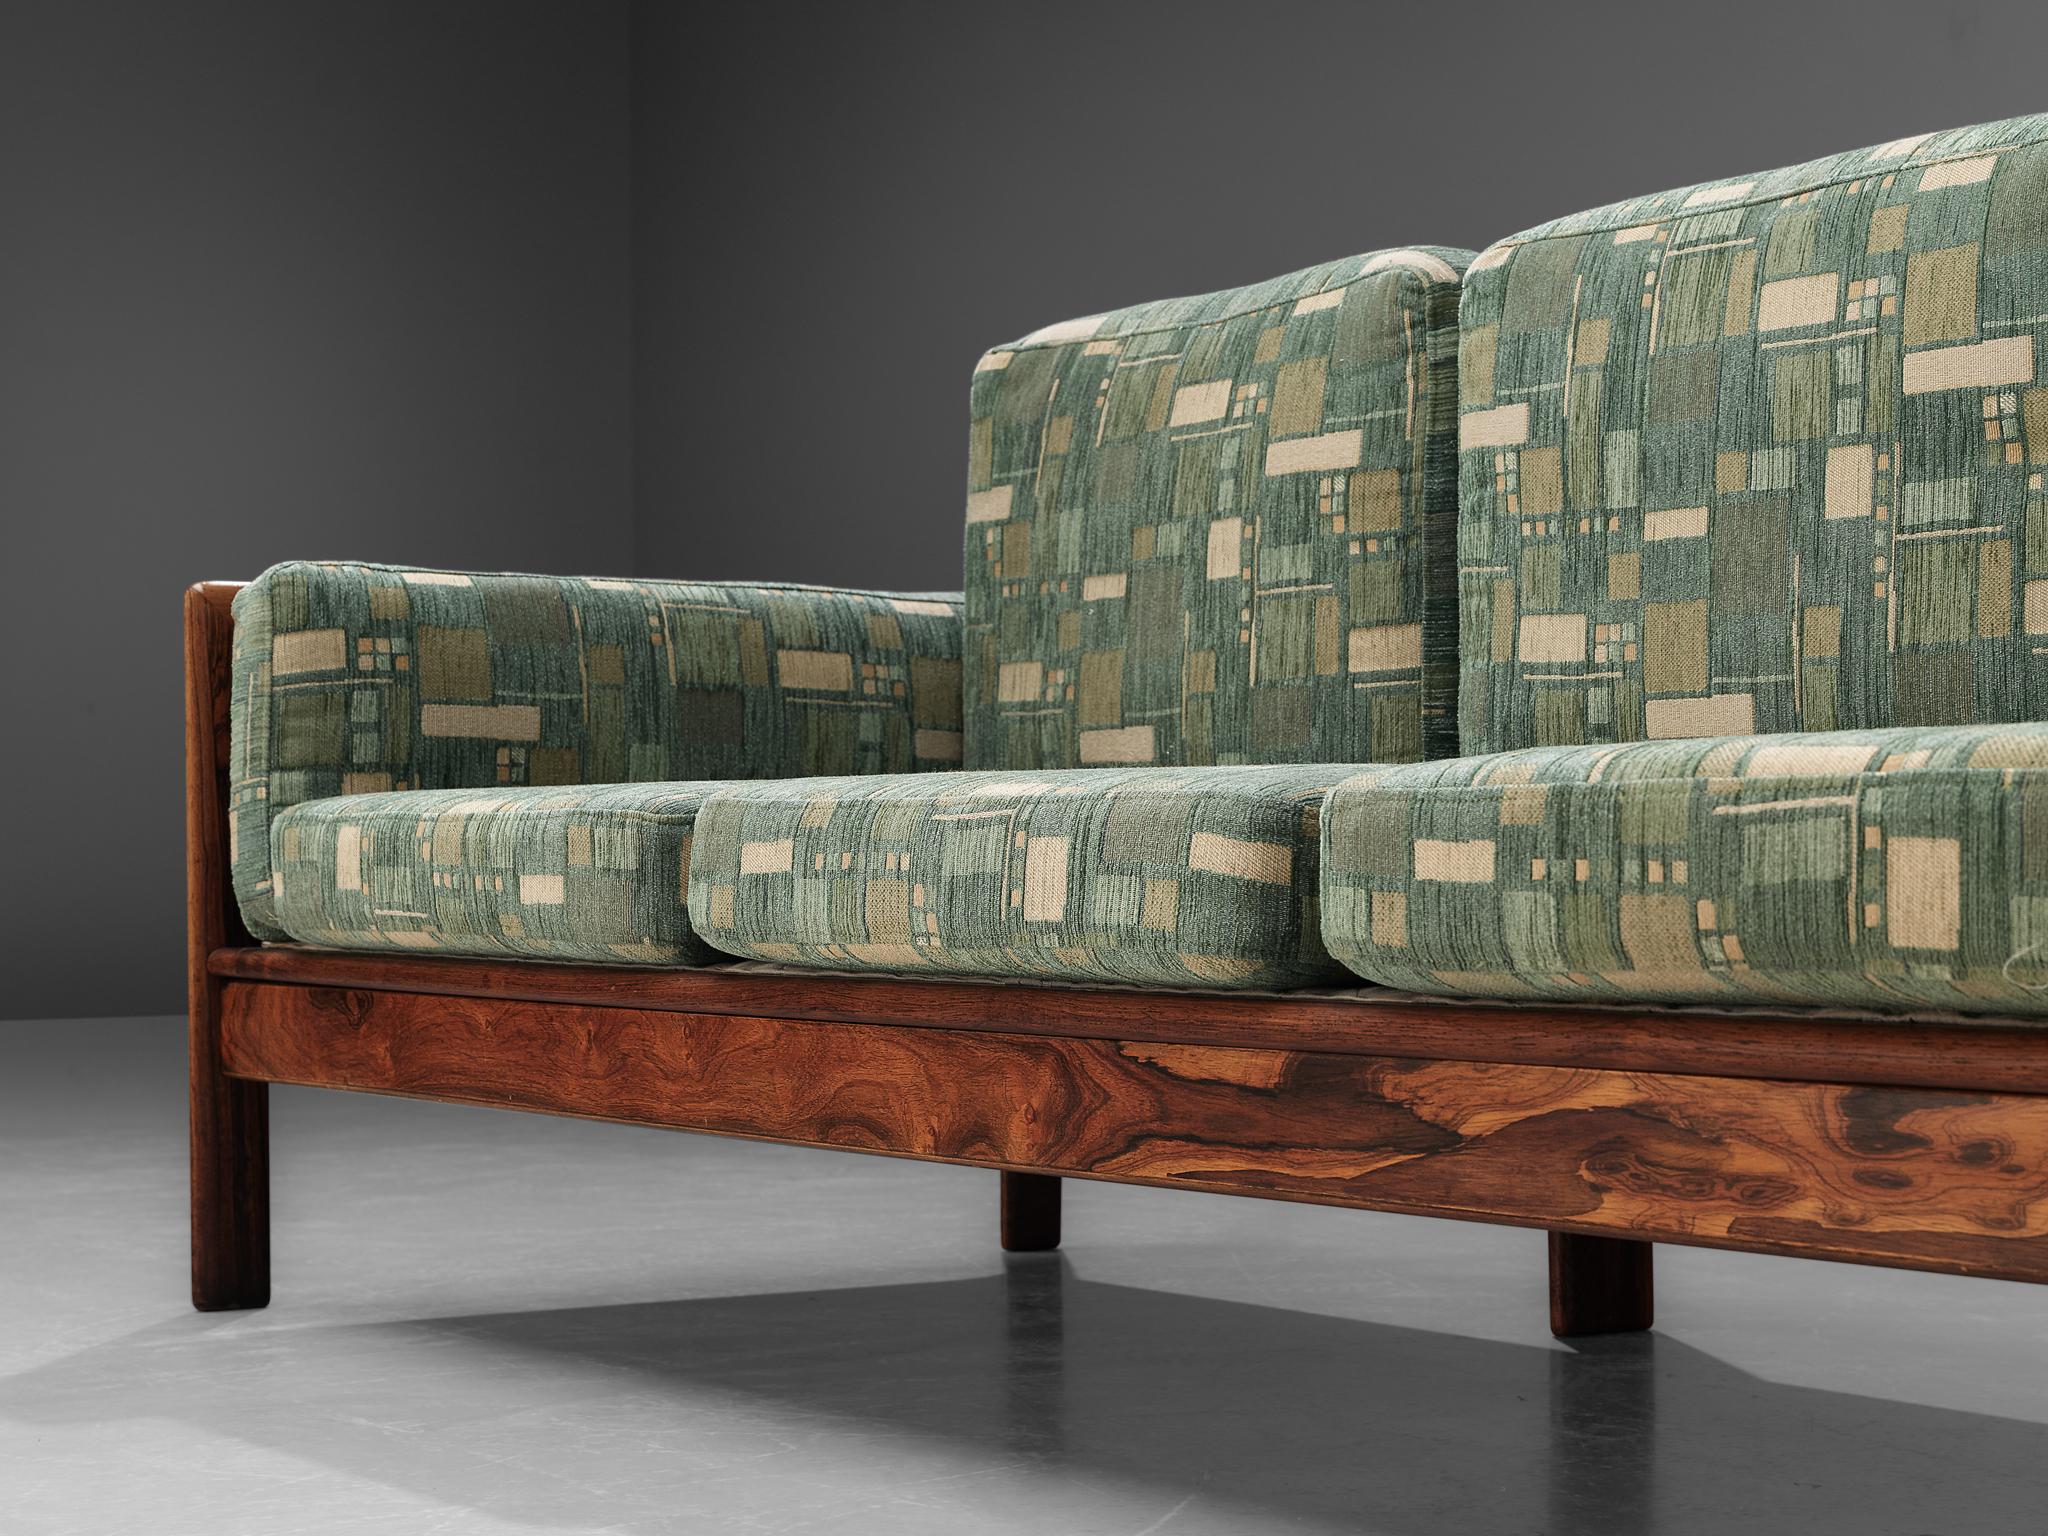 Fabric Danish Sofa in Green Patterned Upholstery